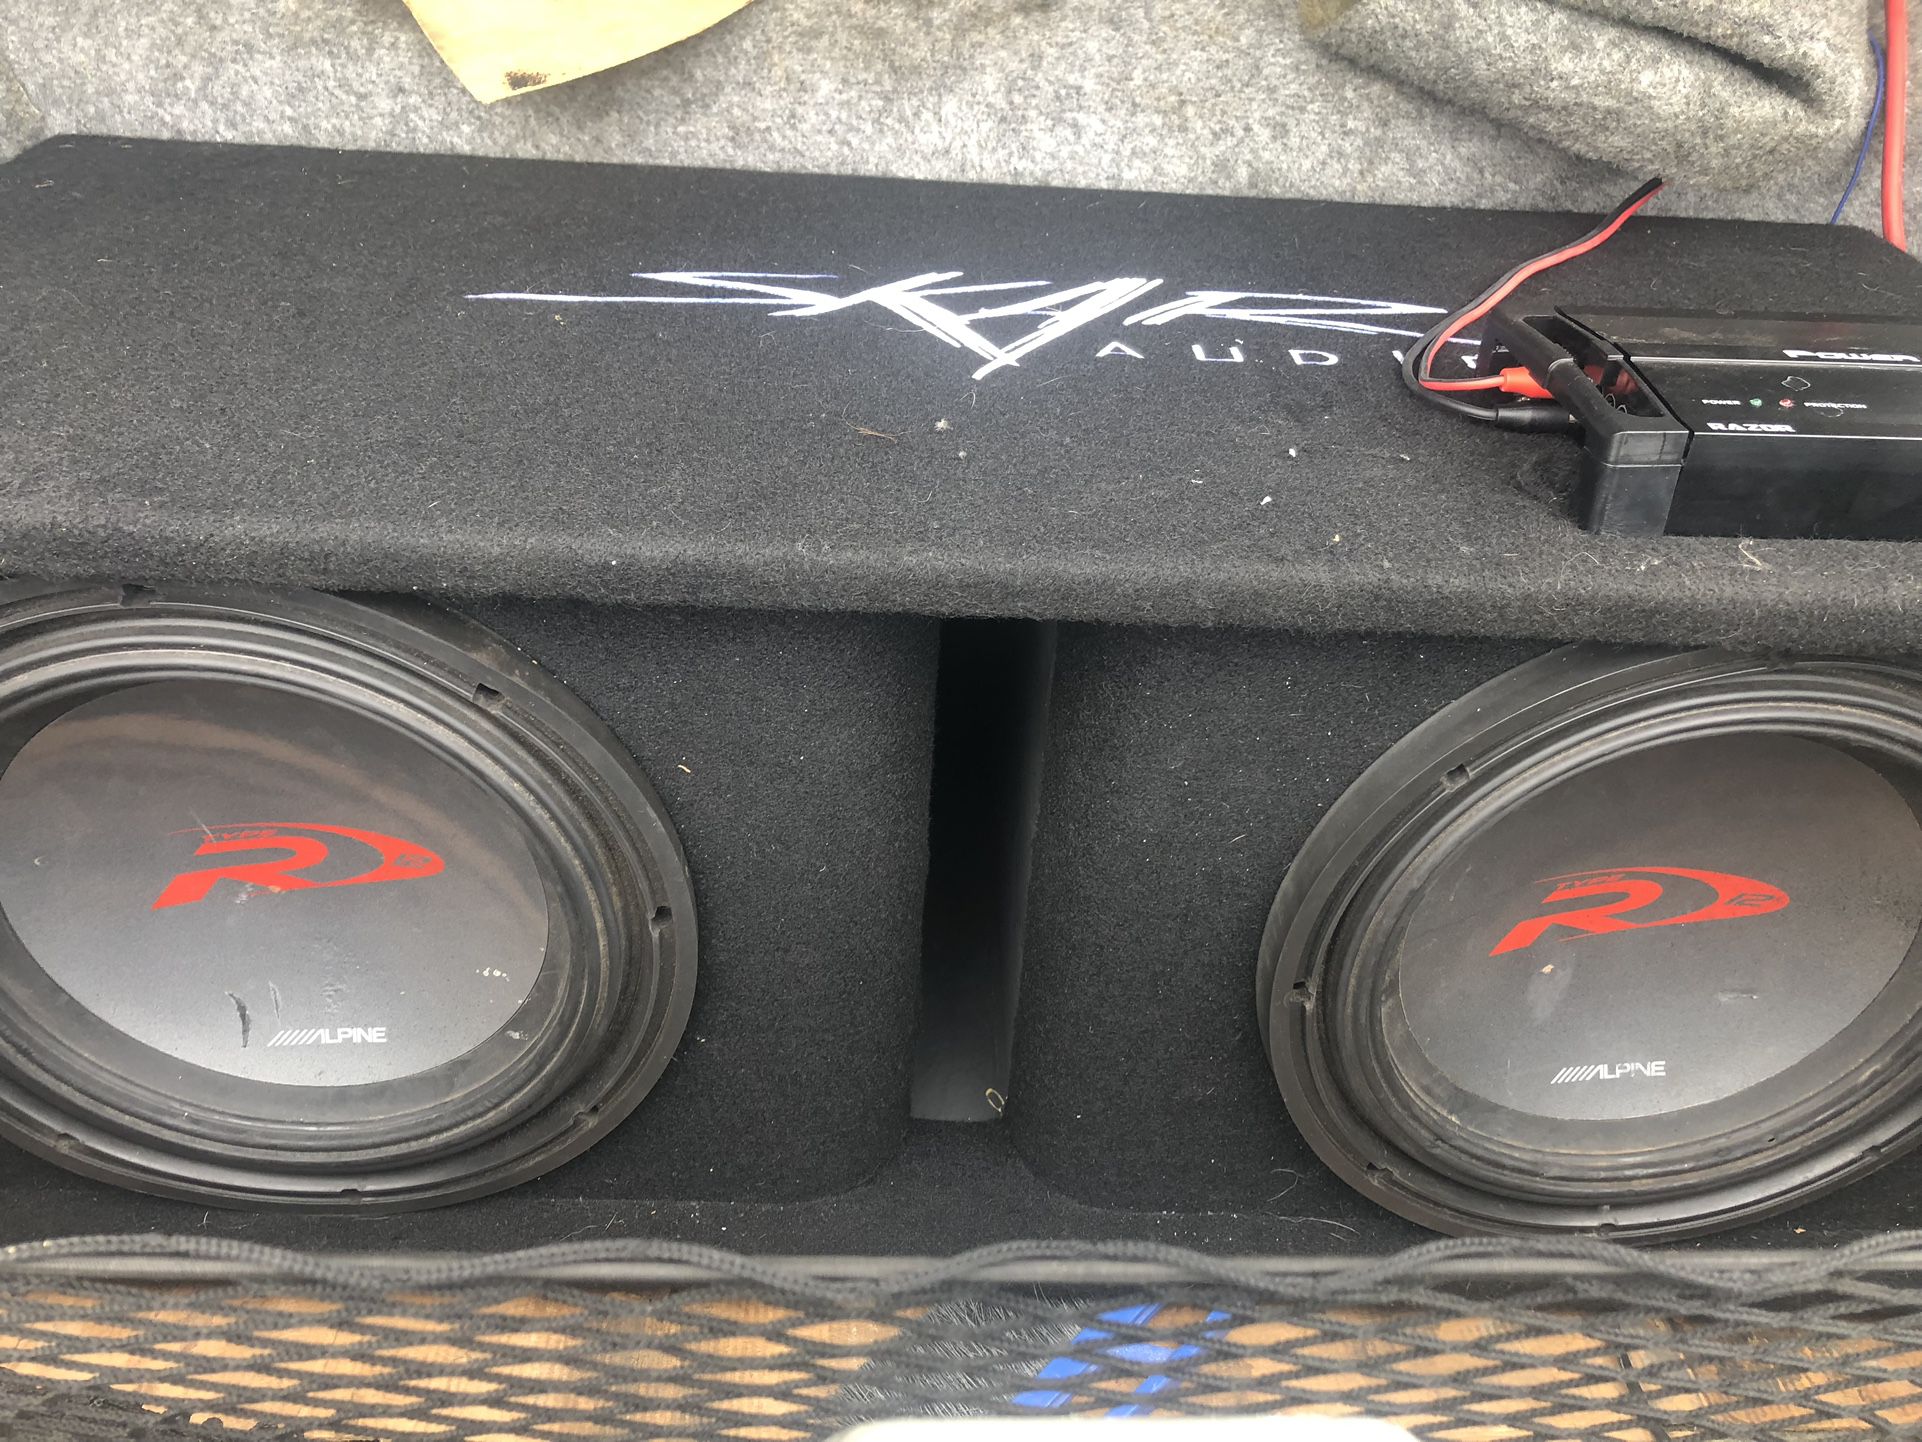 12 Inch Alpine R Type Subwoofers With Ported Box